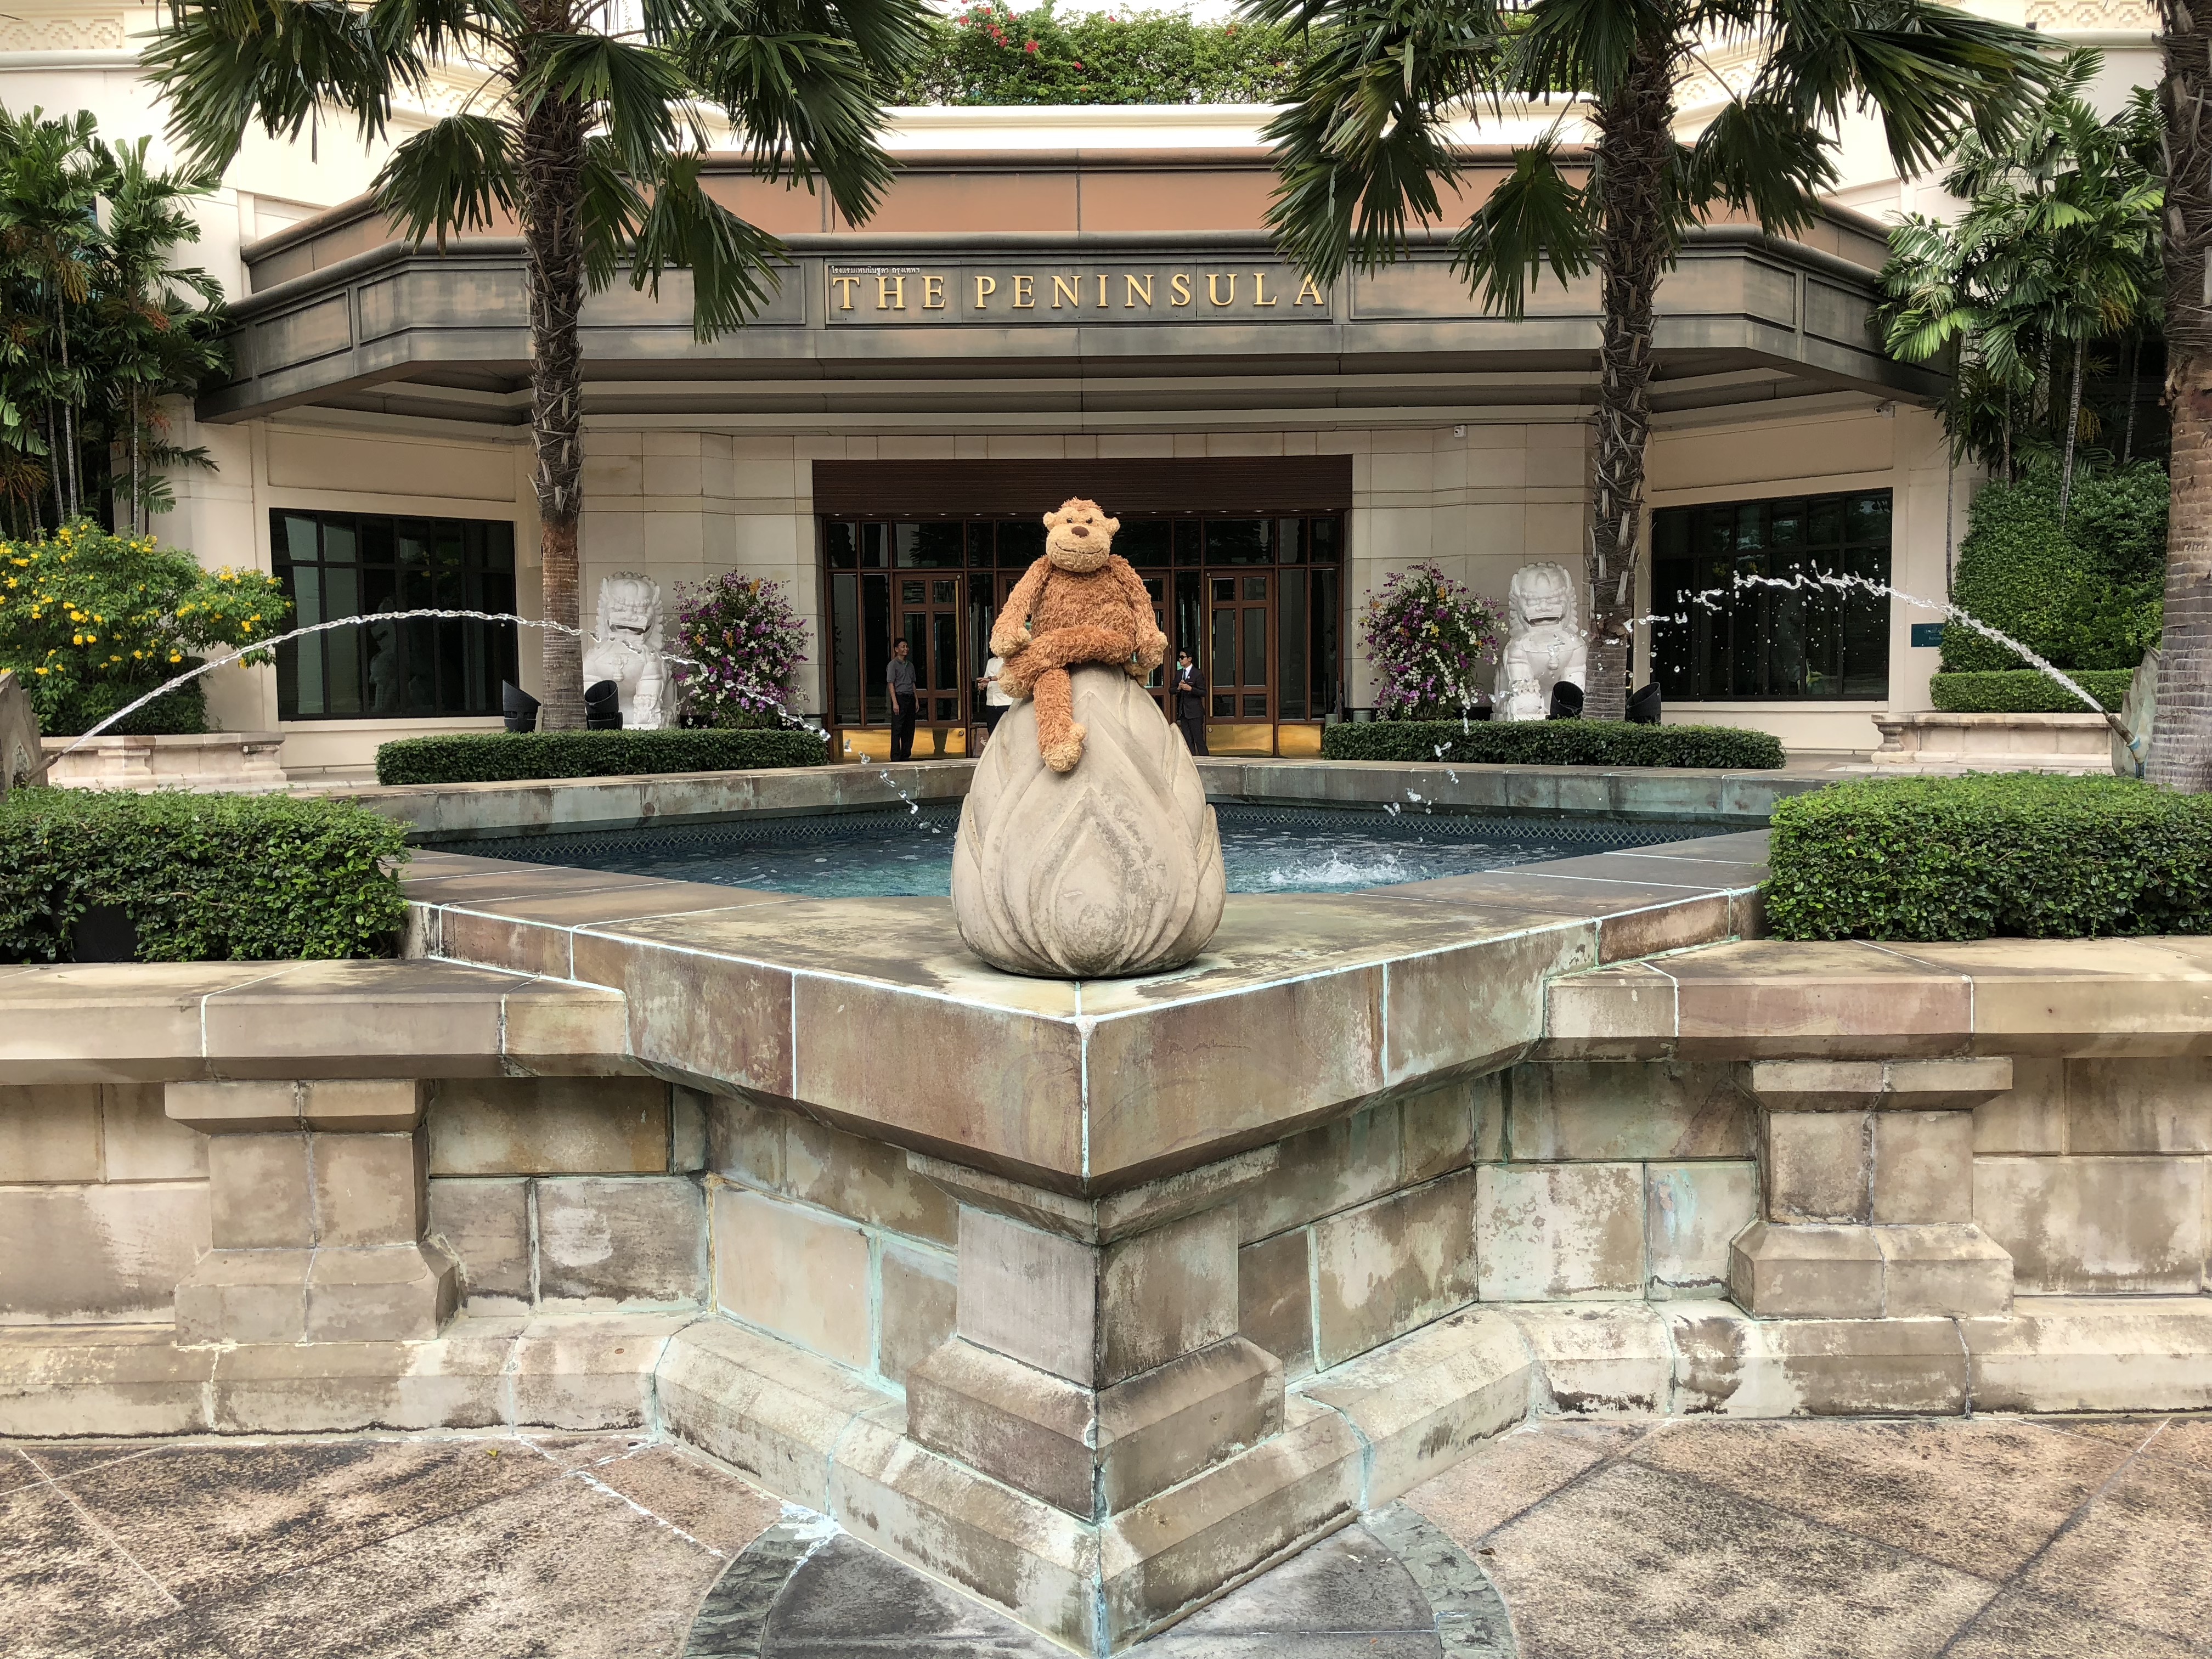 a statue of a teddy bear on a stone object in front of a building